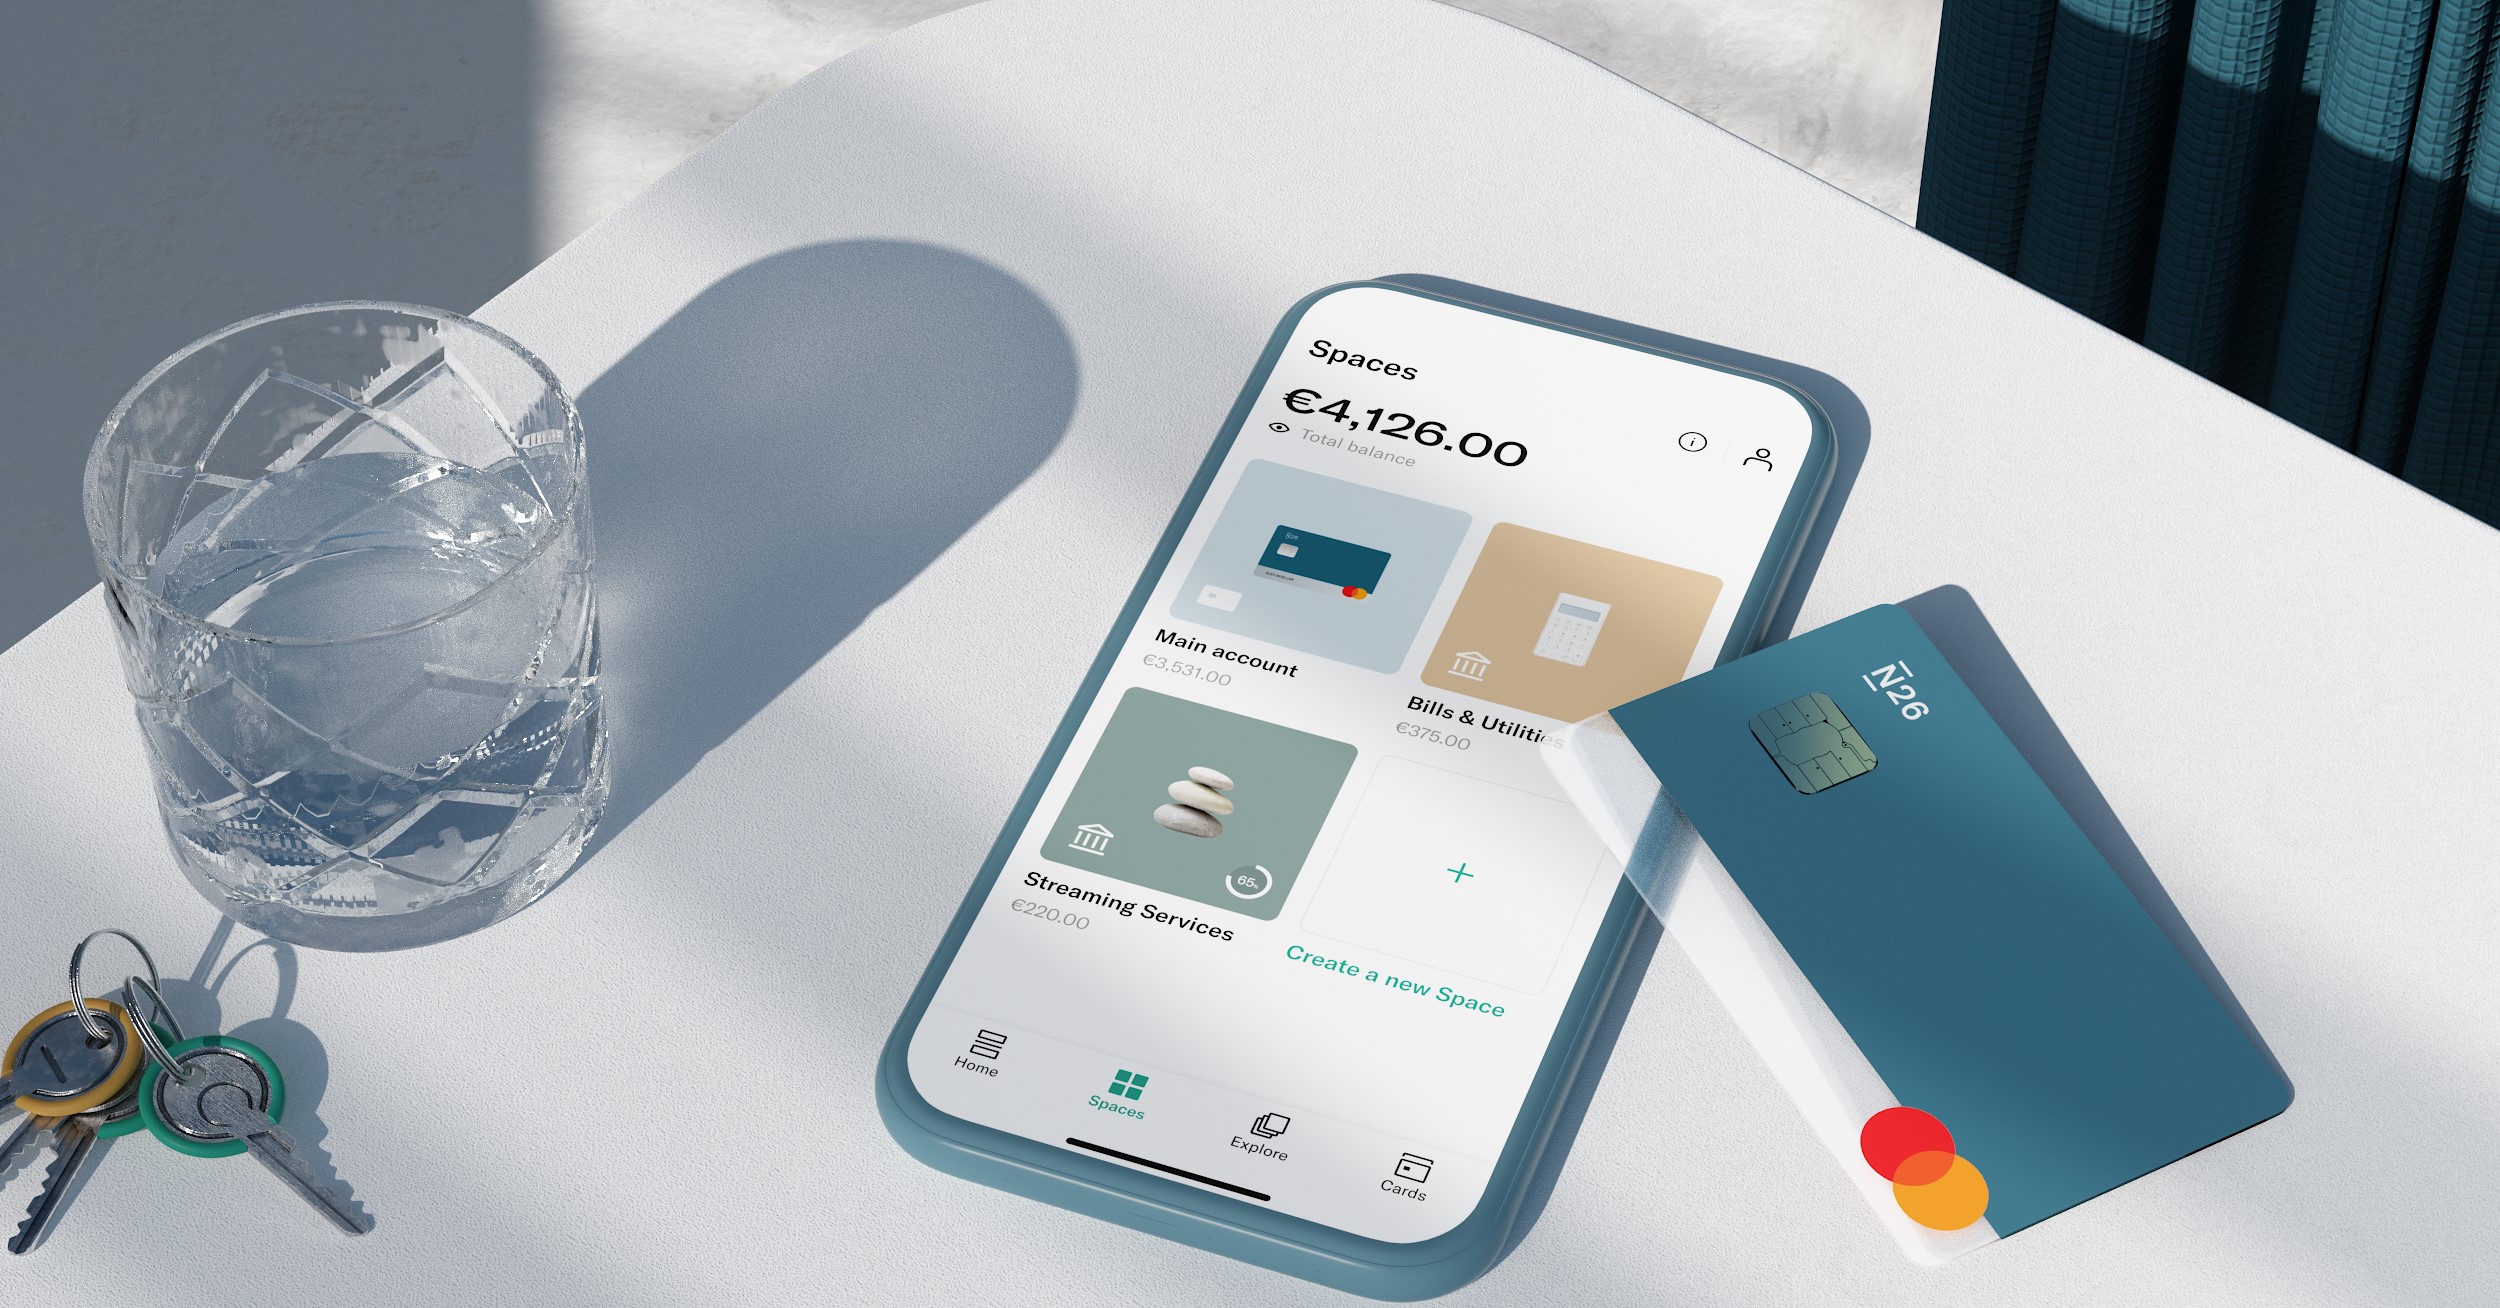 N26 introduces individual IBANs for its Spaces